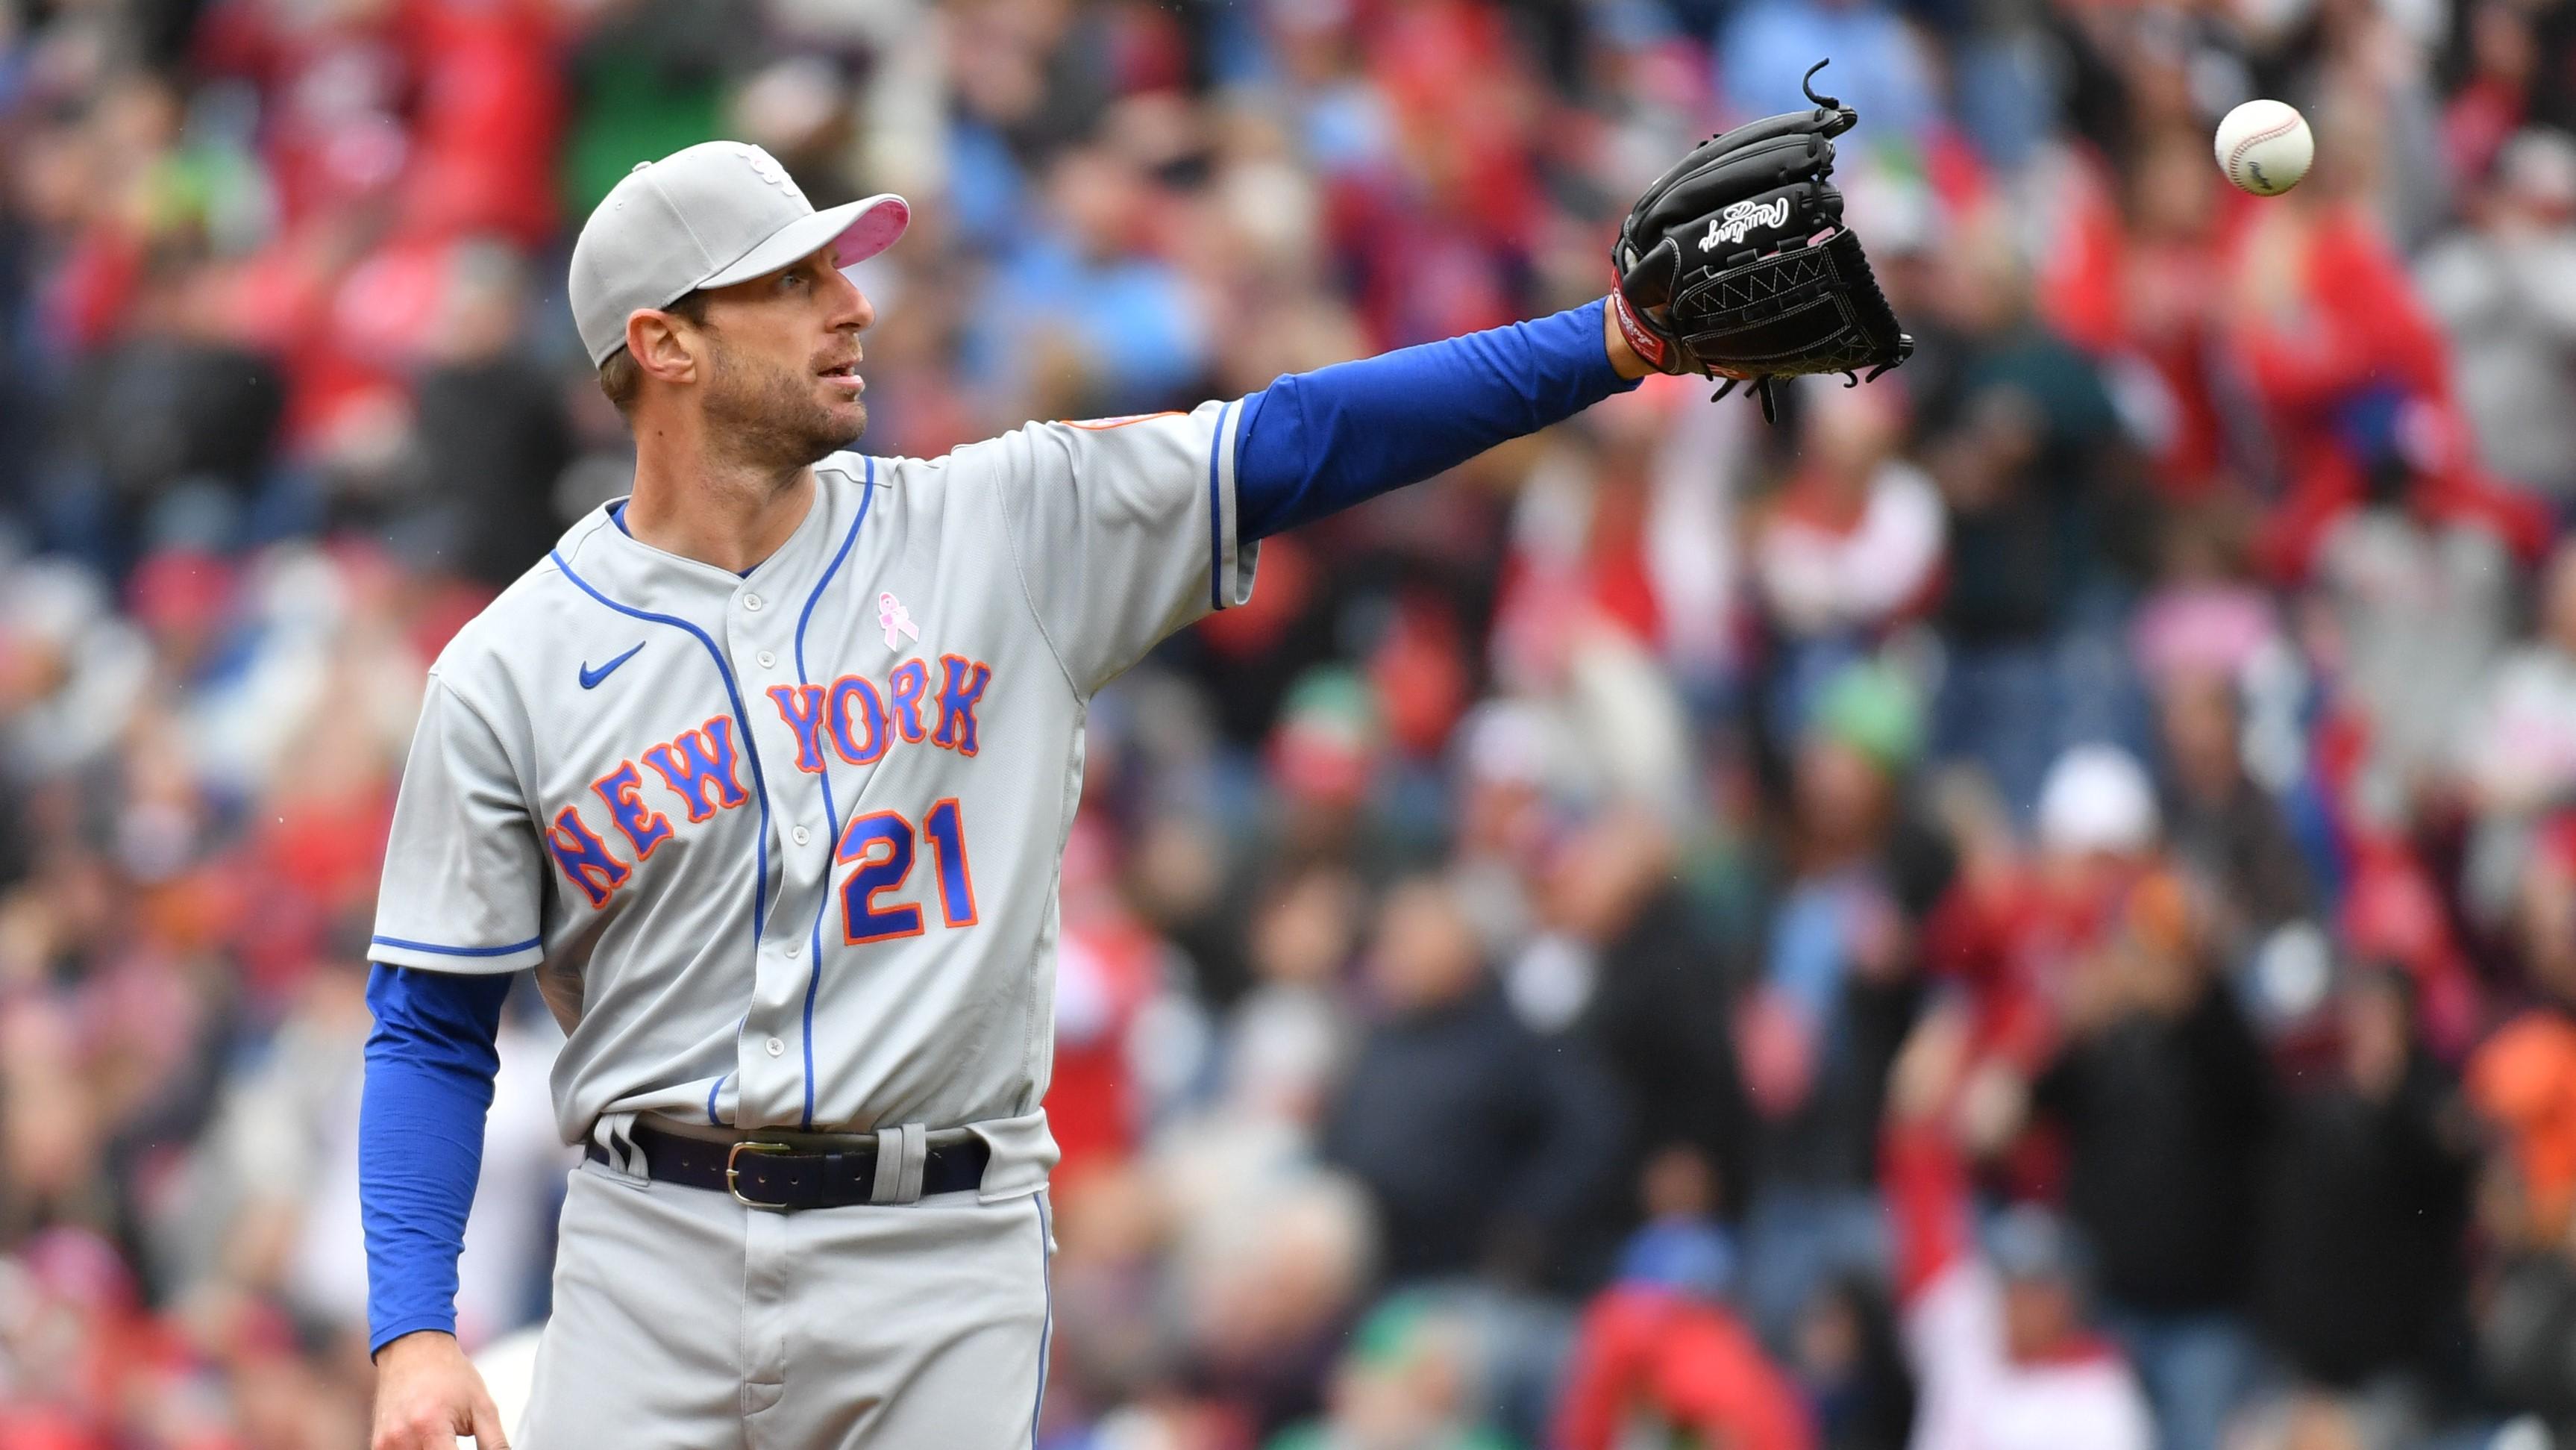 May 8, 2022; Philadelphia, Pennsylvania, USA; New York Mets starting pitcher Max Scherzer (21) gets a new baseball after allowing home run to Philadelphia Phillies right fielder Bryce Harper (3) (not pictured) during the first inning at Citizens Bank Park. / Eric Hartline-USA TODAY Sports